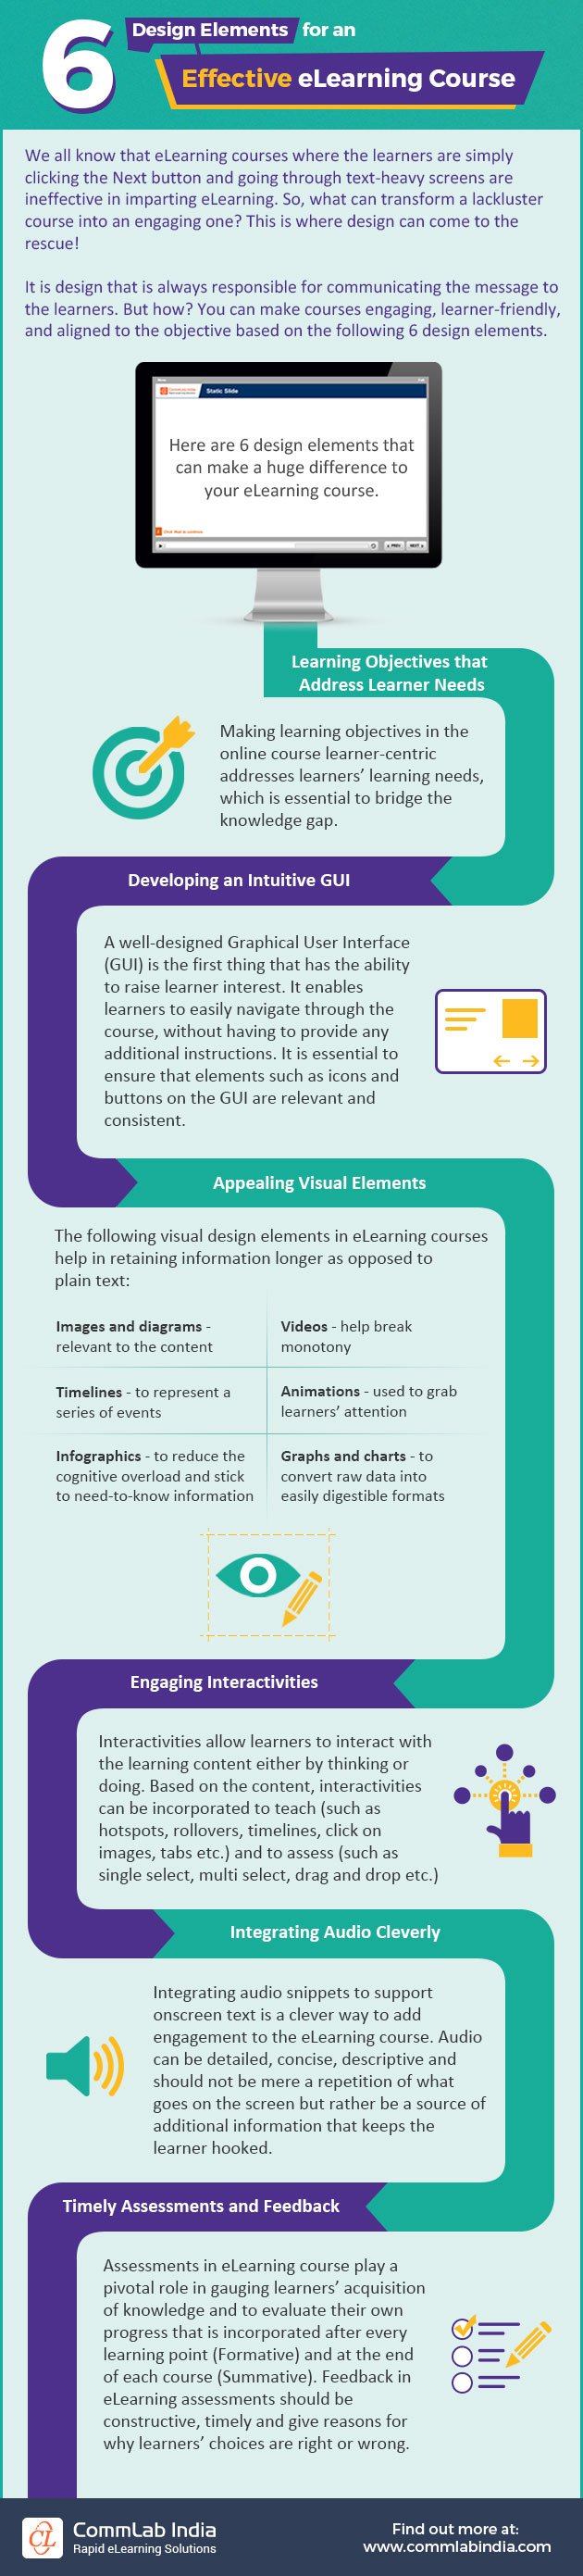 6 Design Elements for an Effective eLearning Course [Infographic]